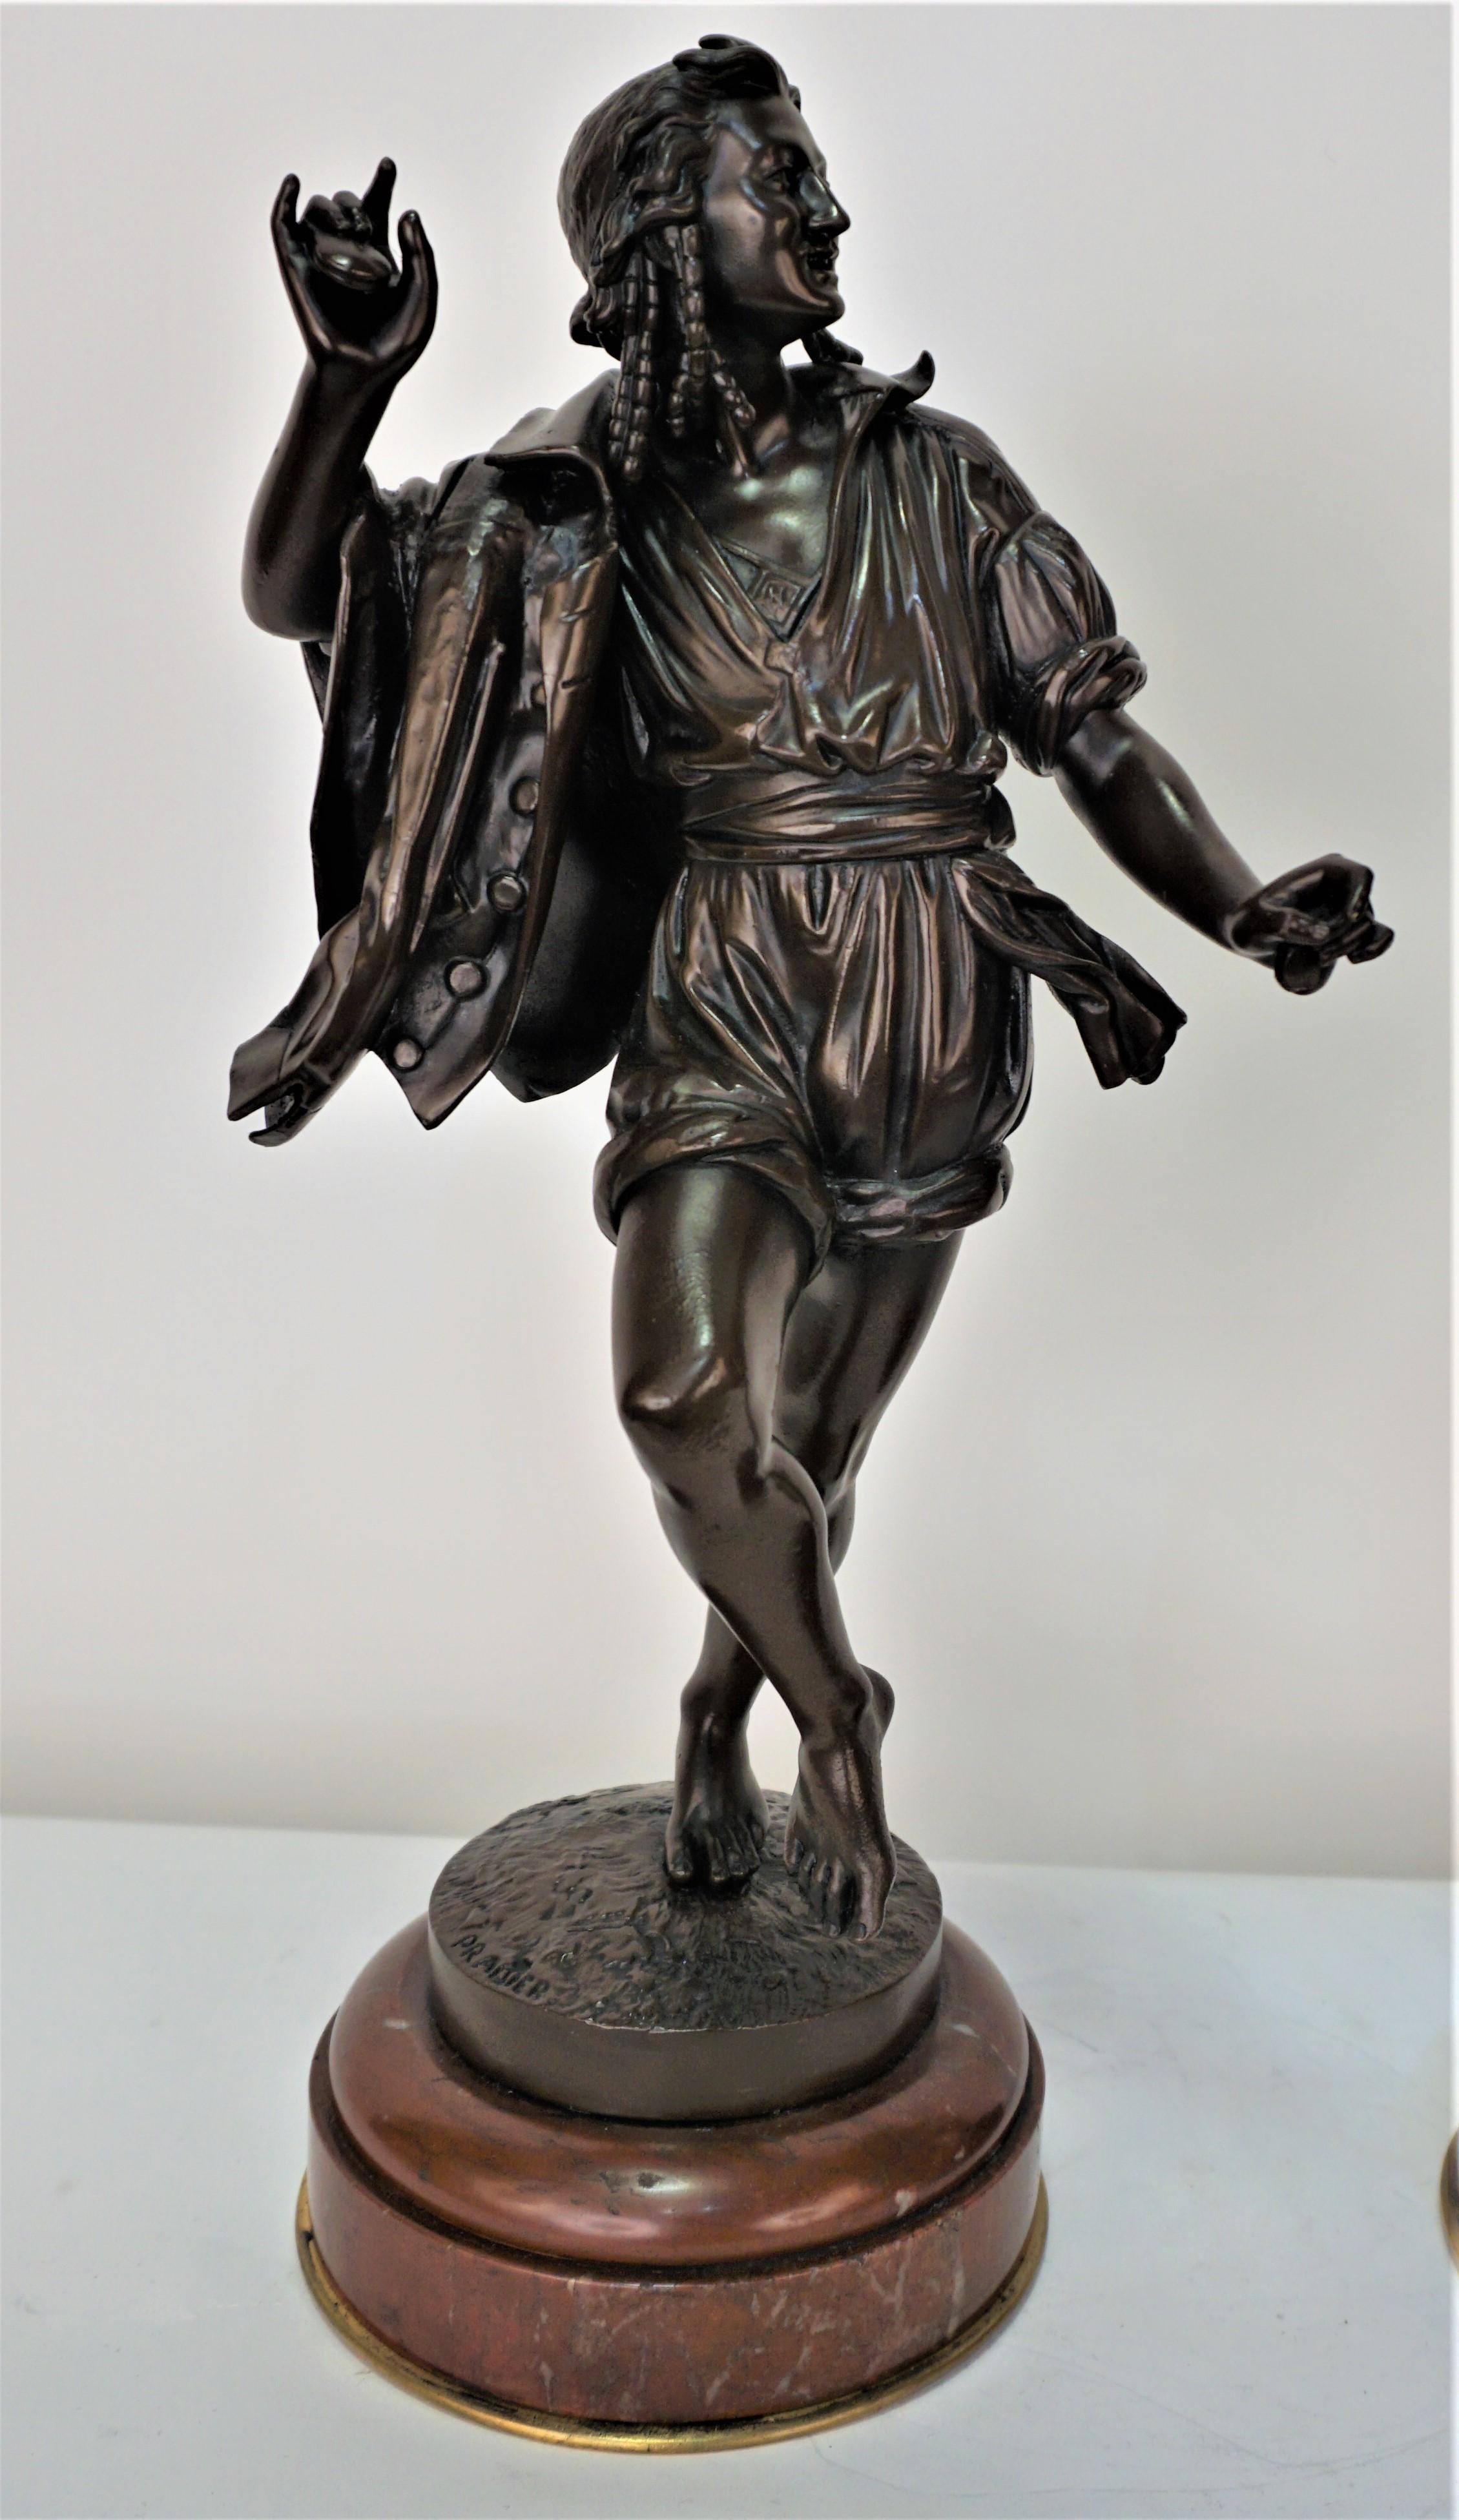 Pair of 19th century high quality cast bronze with great detail by Pradier
Cold paint finish on bronze standing on rouge marble